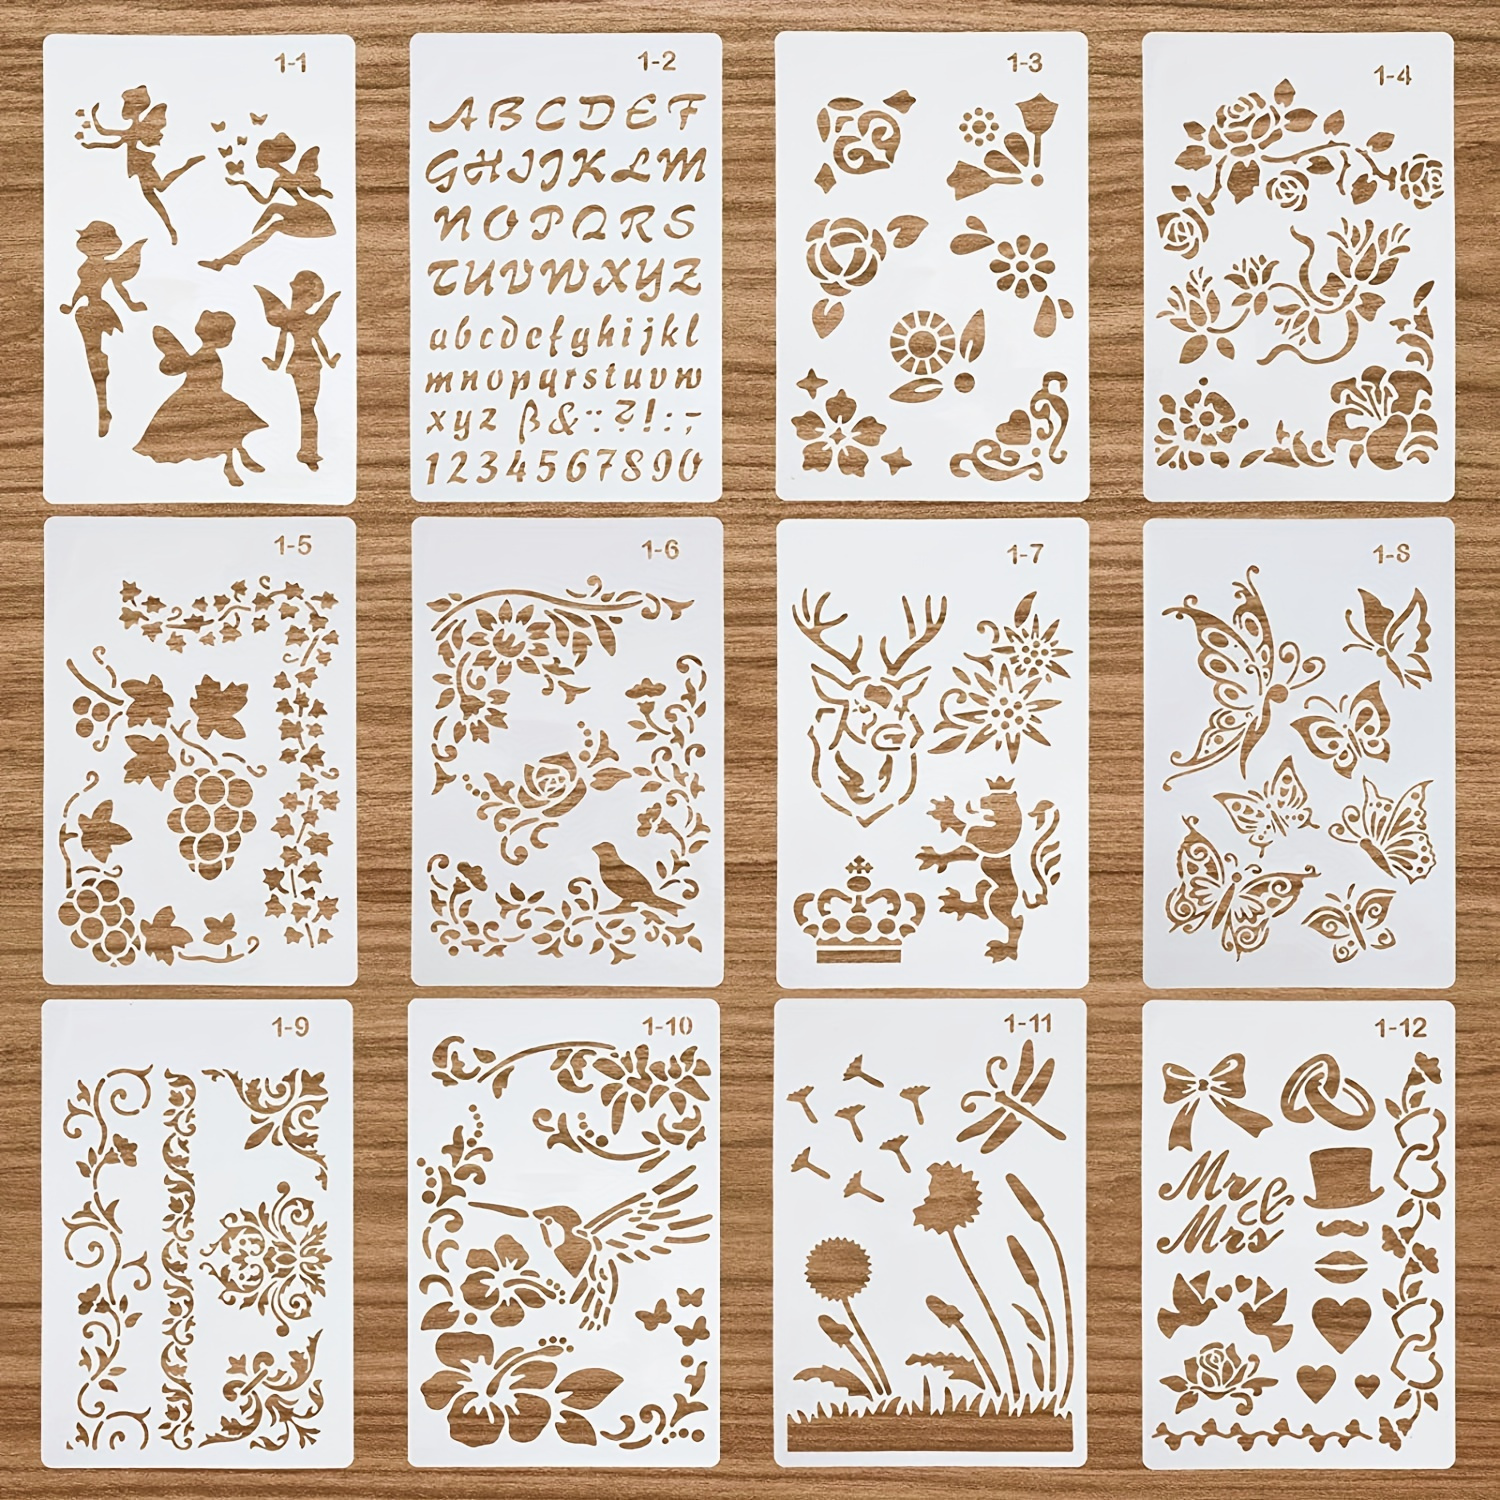  Drawing Stencils Set for Kids, 20 pcs DIY Drawing  Template,Bullet Journal Stencil,Over 300 Different Patterns,Reusable  Washable Craft : Arts, Crafts & Sewing